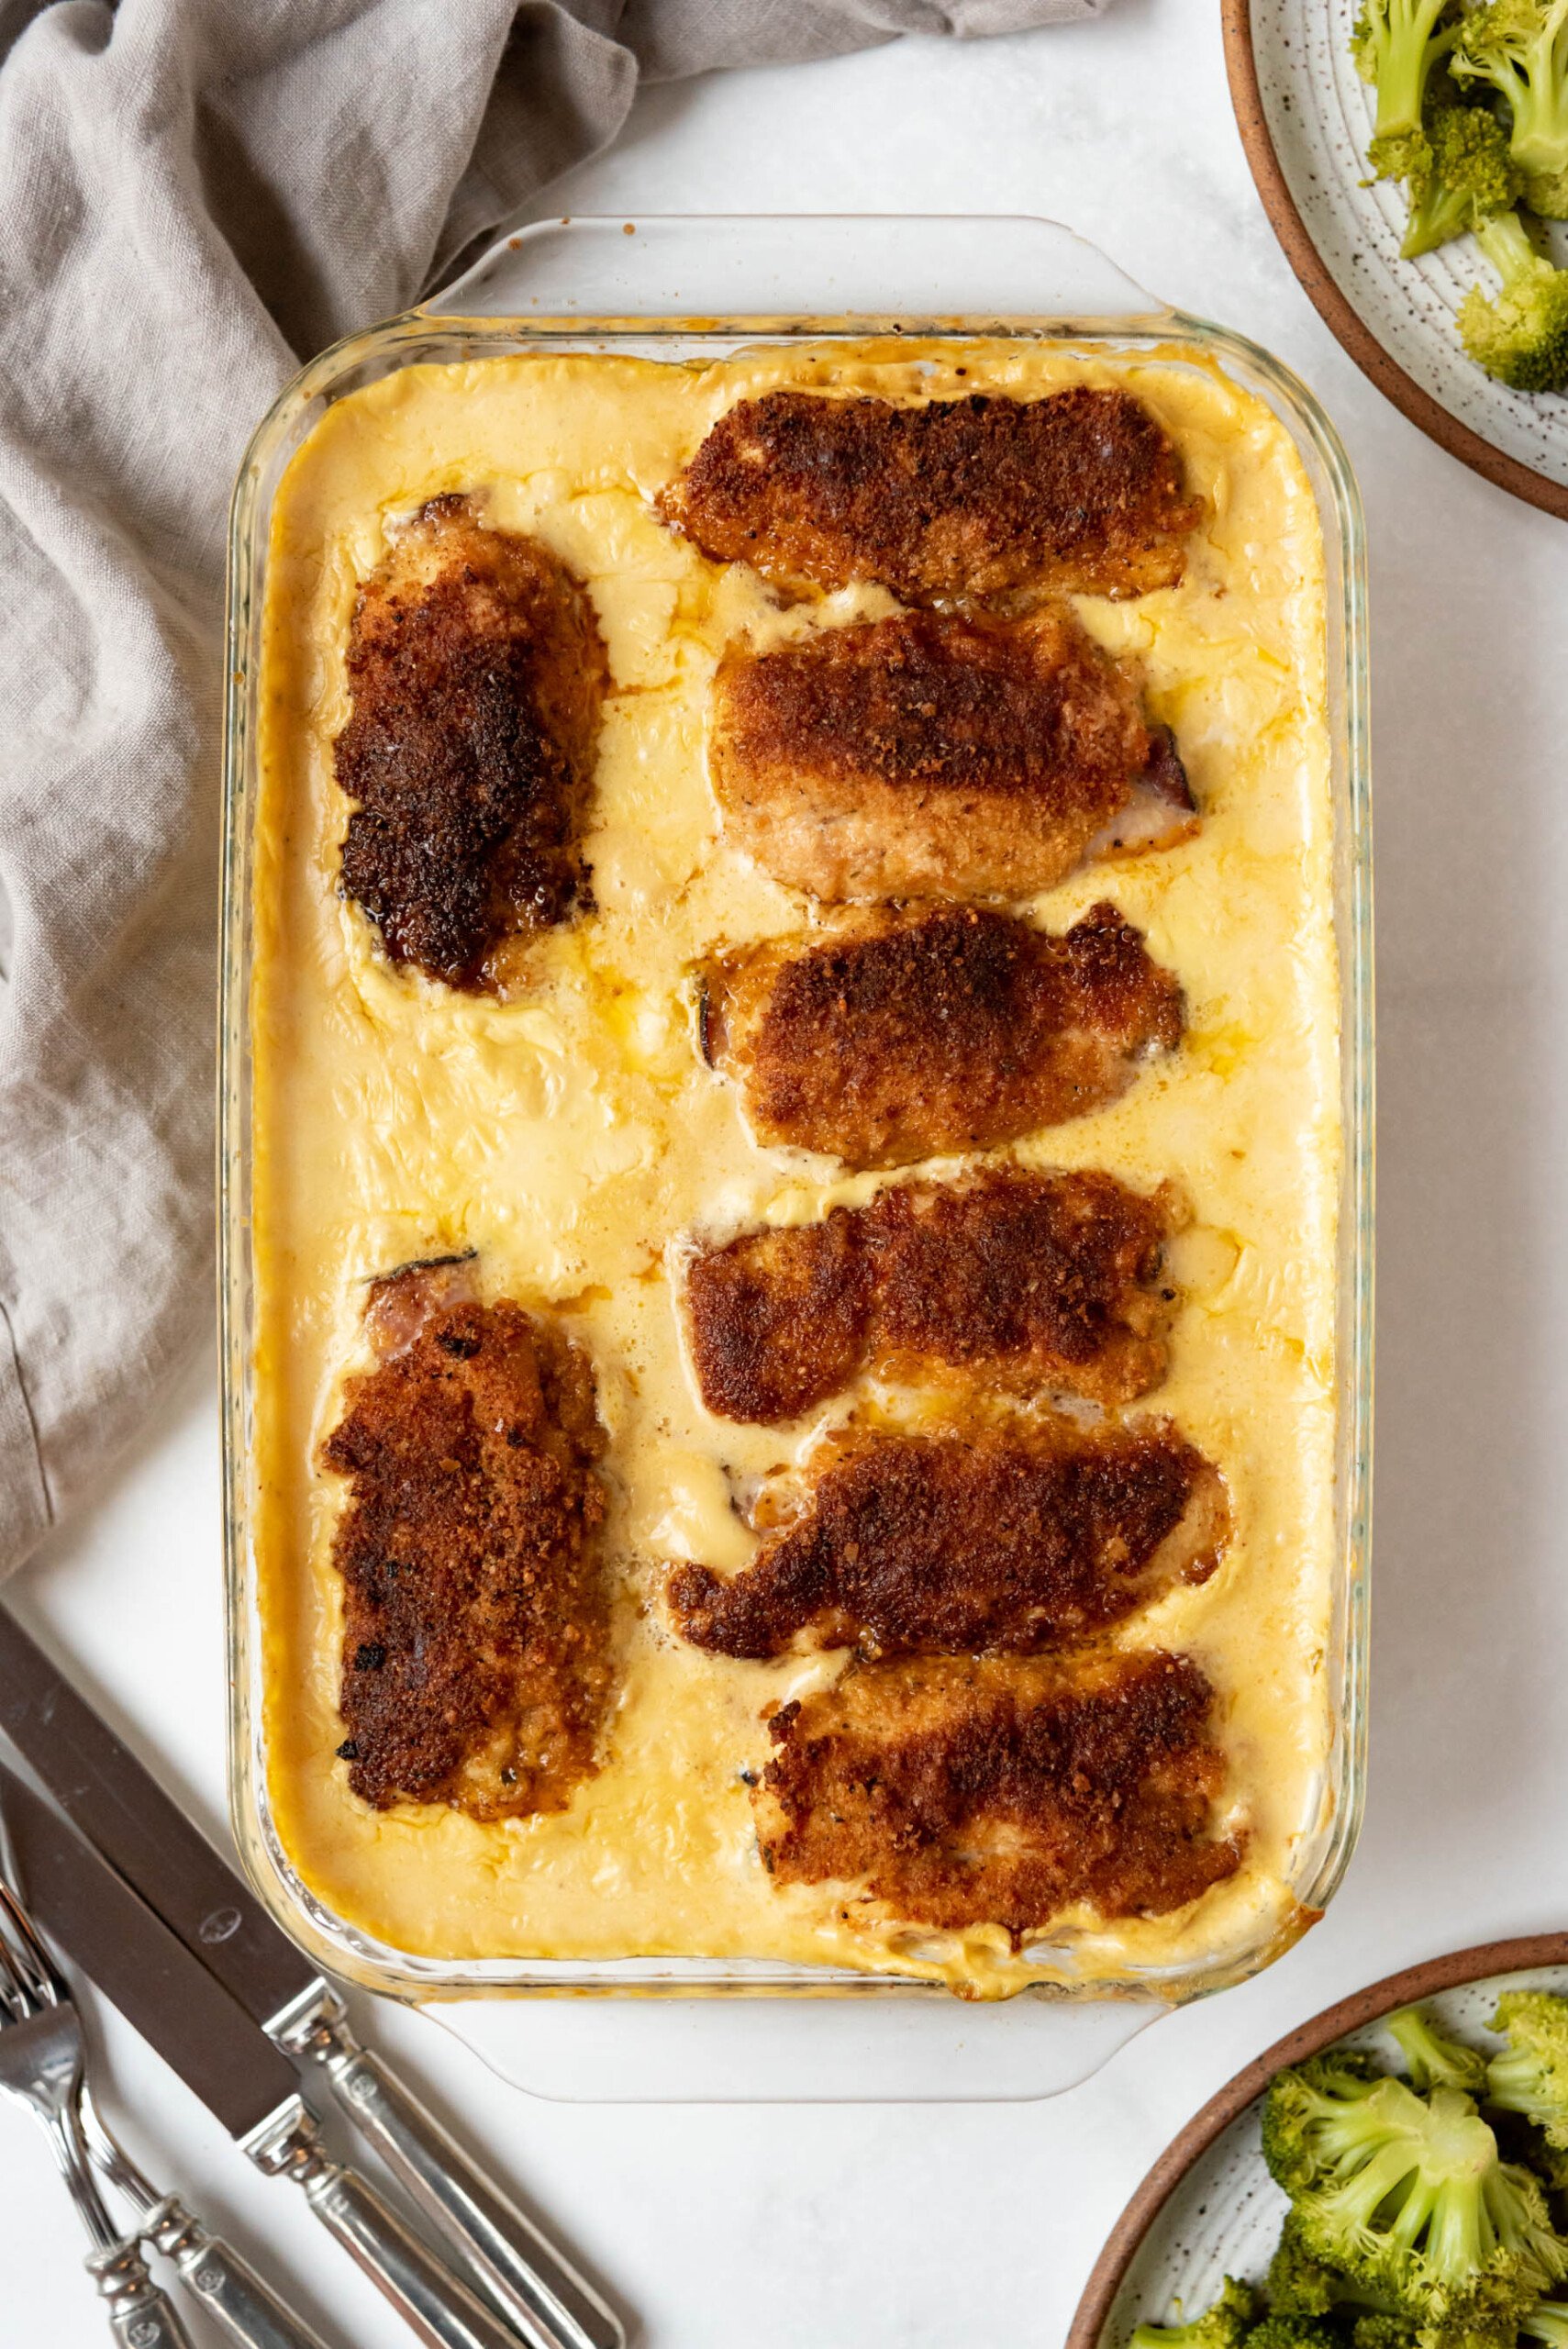 A casserole dish filled with chicken cordon bleu in a creamy sauce.